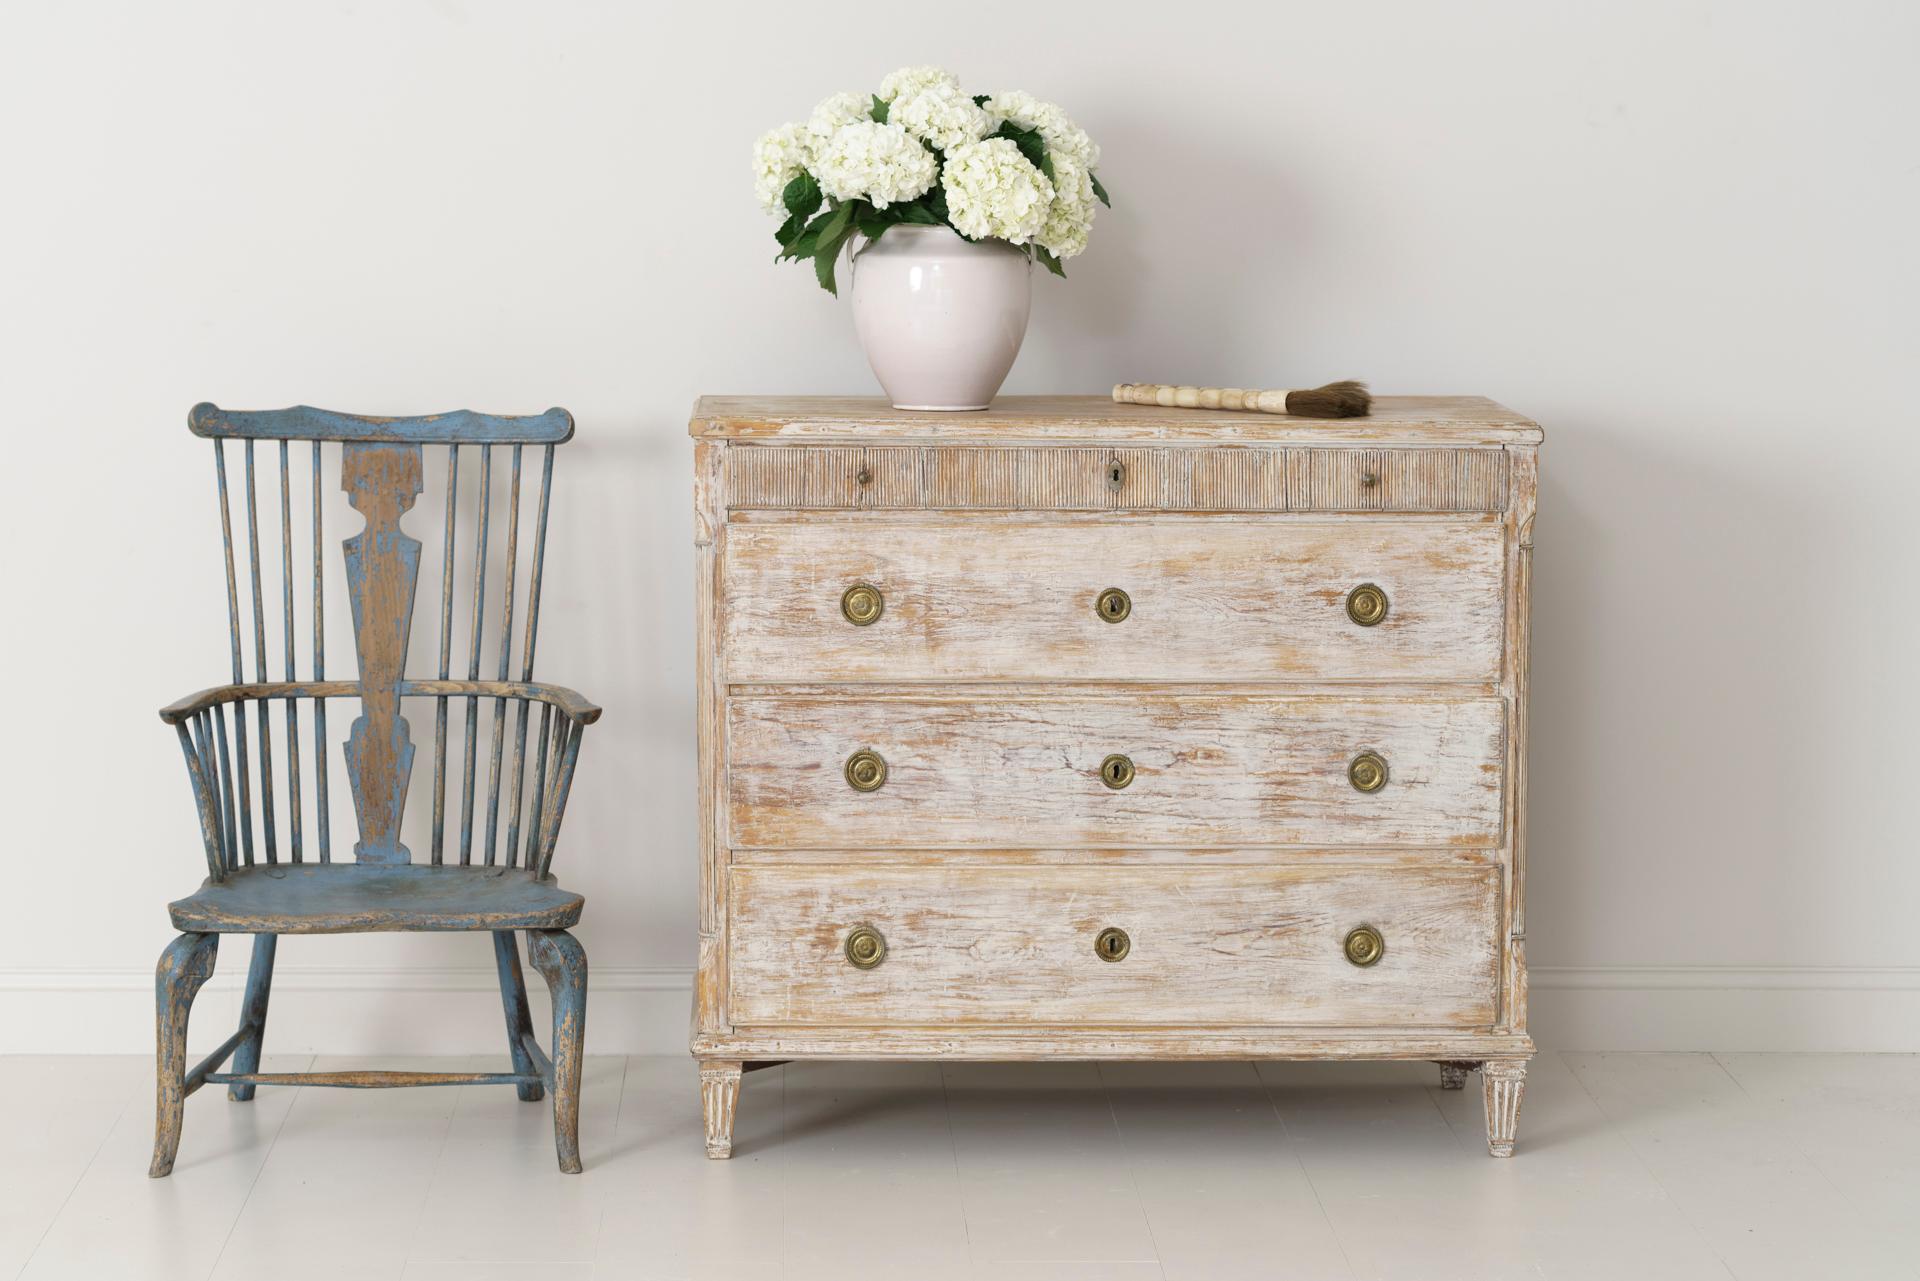 An 18th century Swedish commode from the Gustavian period, dry scraped back to reveal the original white paint and natural wood surface. This tall commode has three deep drawers with one small, reeded drawer and reeded corner columns, raised upon